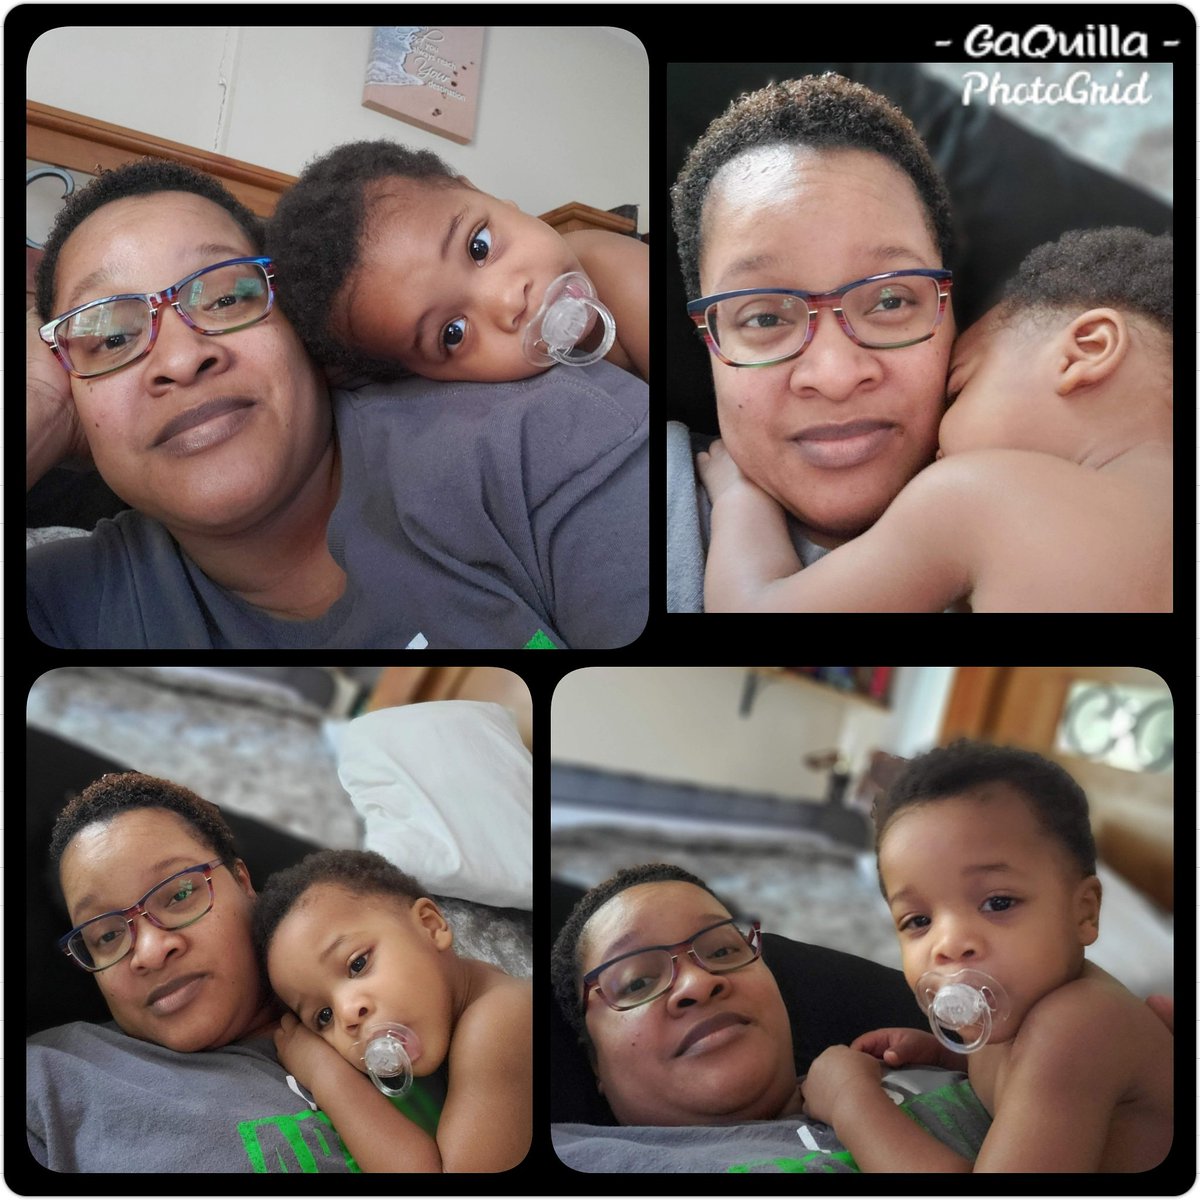 Can somebody please remind Ellis about the rules for #socialdistancing2020 cause he's STILL not understanding my plight 😐🥴😕😘
#blacktoddlers #toddlermommy #toddlermoms #toddlertales #socialdistancing #boysboysboys 
#blackmoms #blackmomsbelike #momofboys